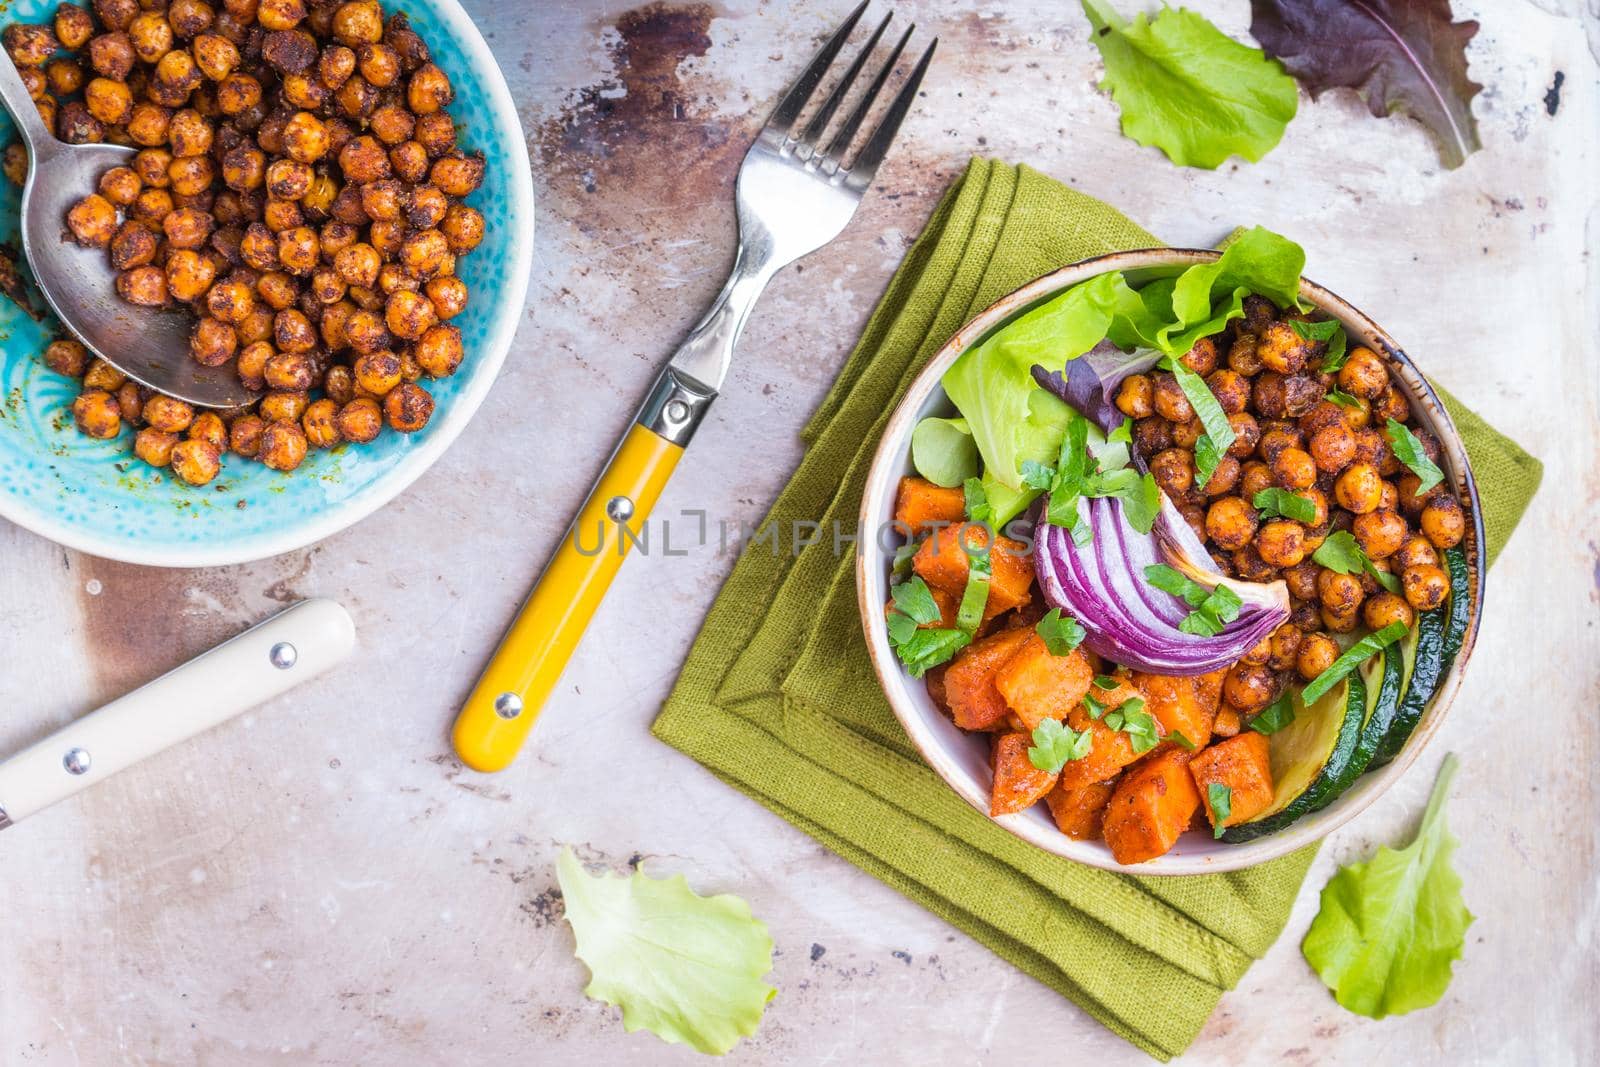 Healthy vegetarian salad with vegetables, sweet potato, chickpea, salad leaves. Healthy buddha bowl salad, sauce, fork. Vegan or vegetarian food. Healthy lunch/dinner. Salad in bowl on table. Top view